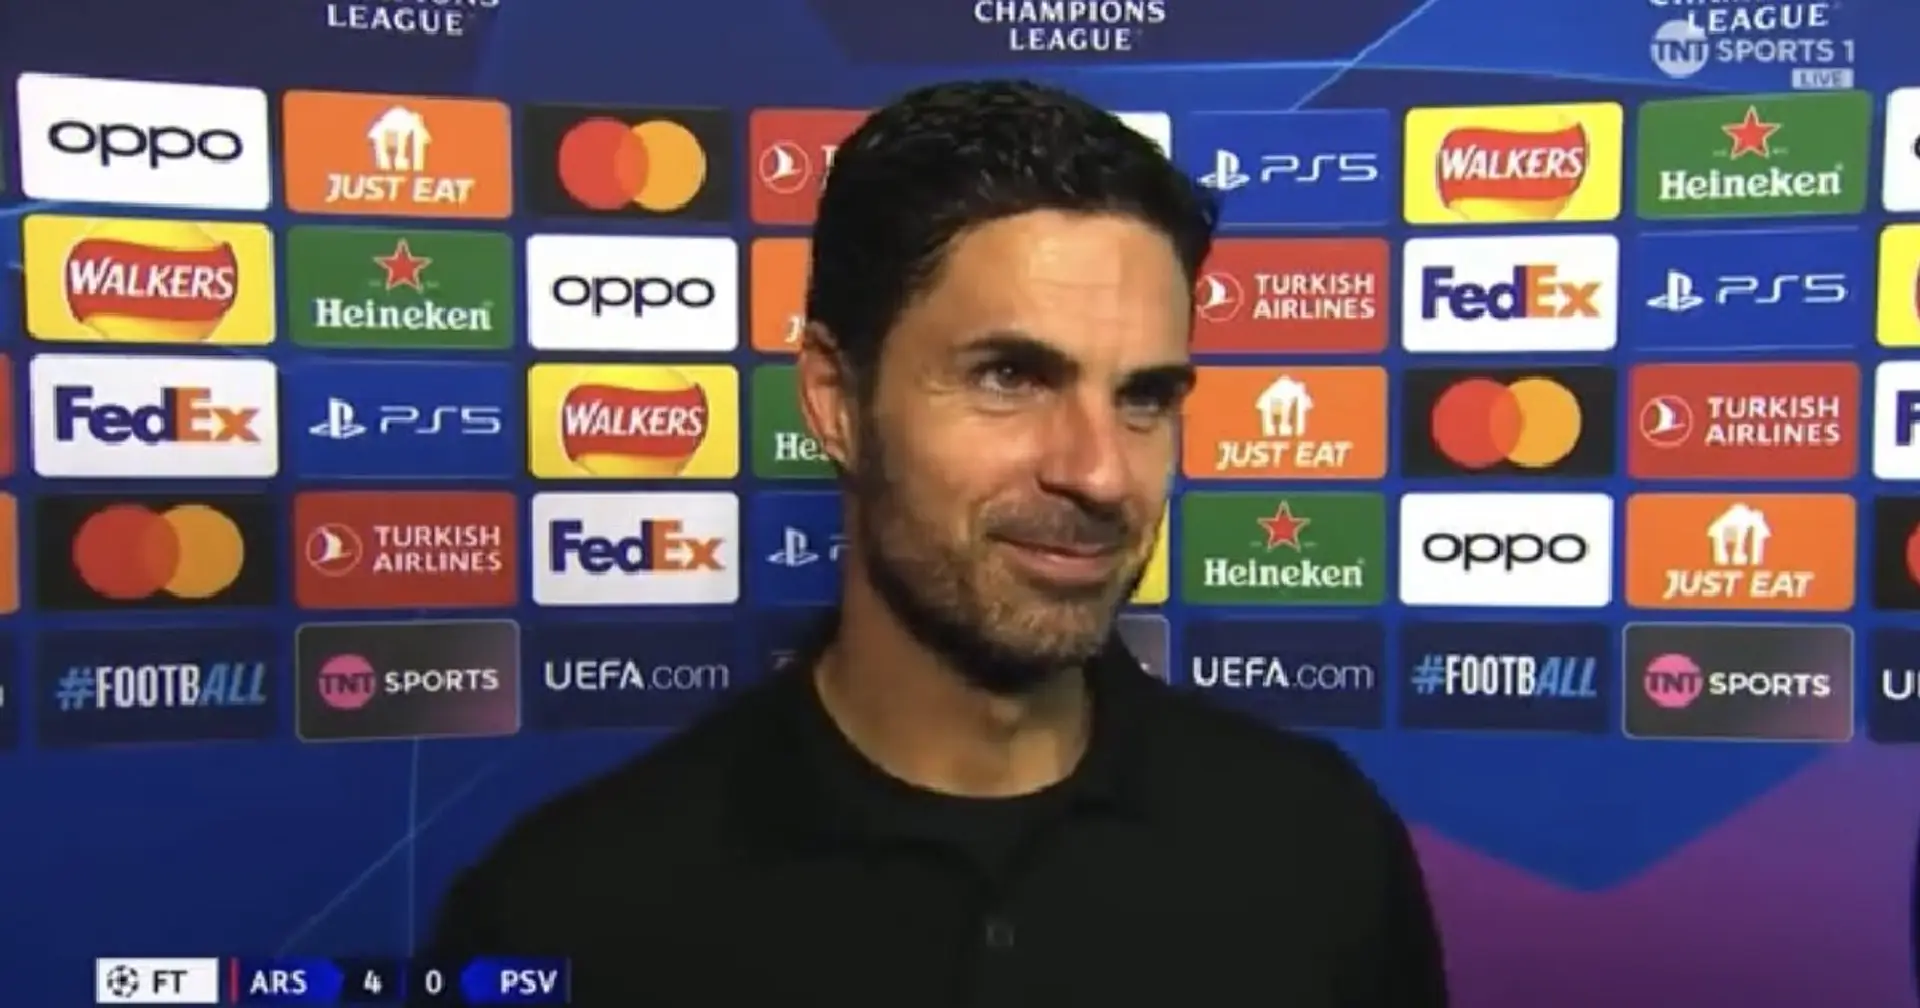 Arteta explains how he will celebrate Champions League victory with his wife - without their kids